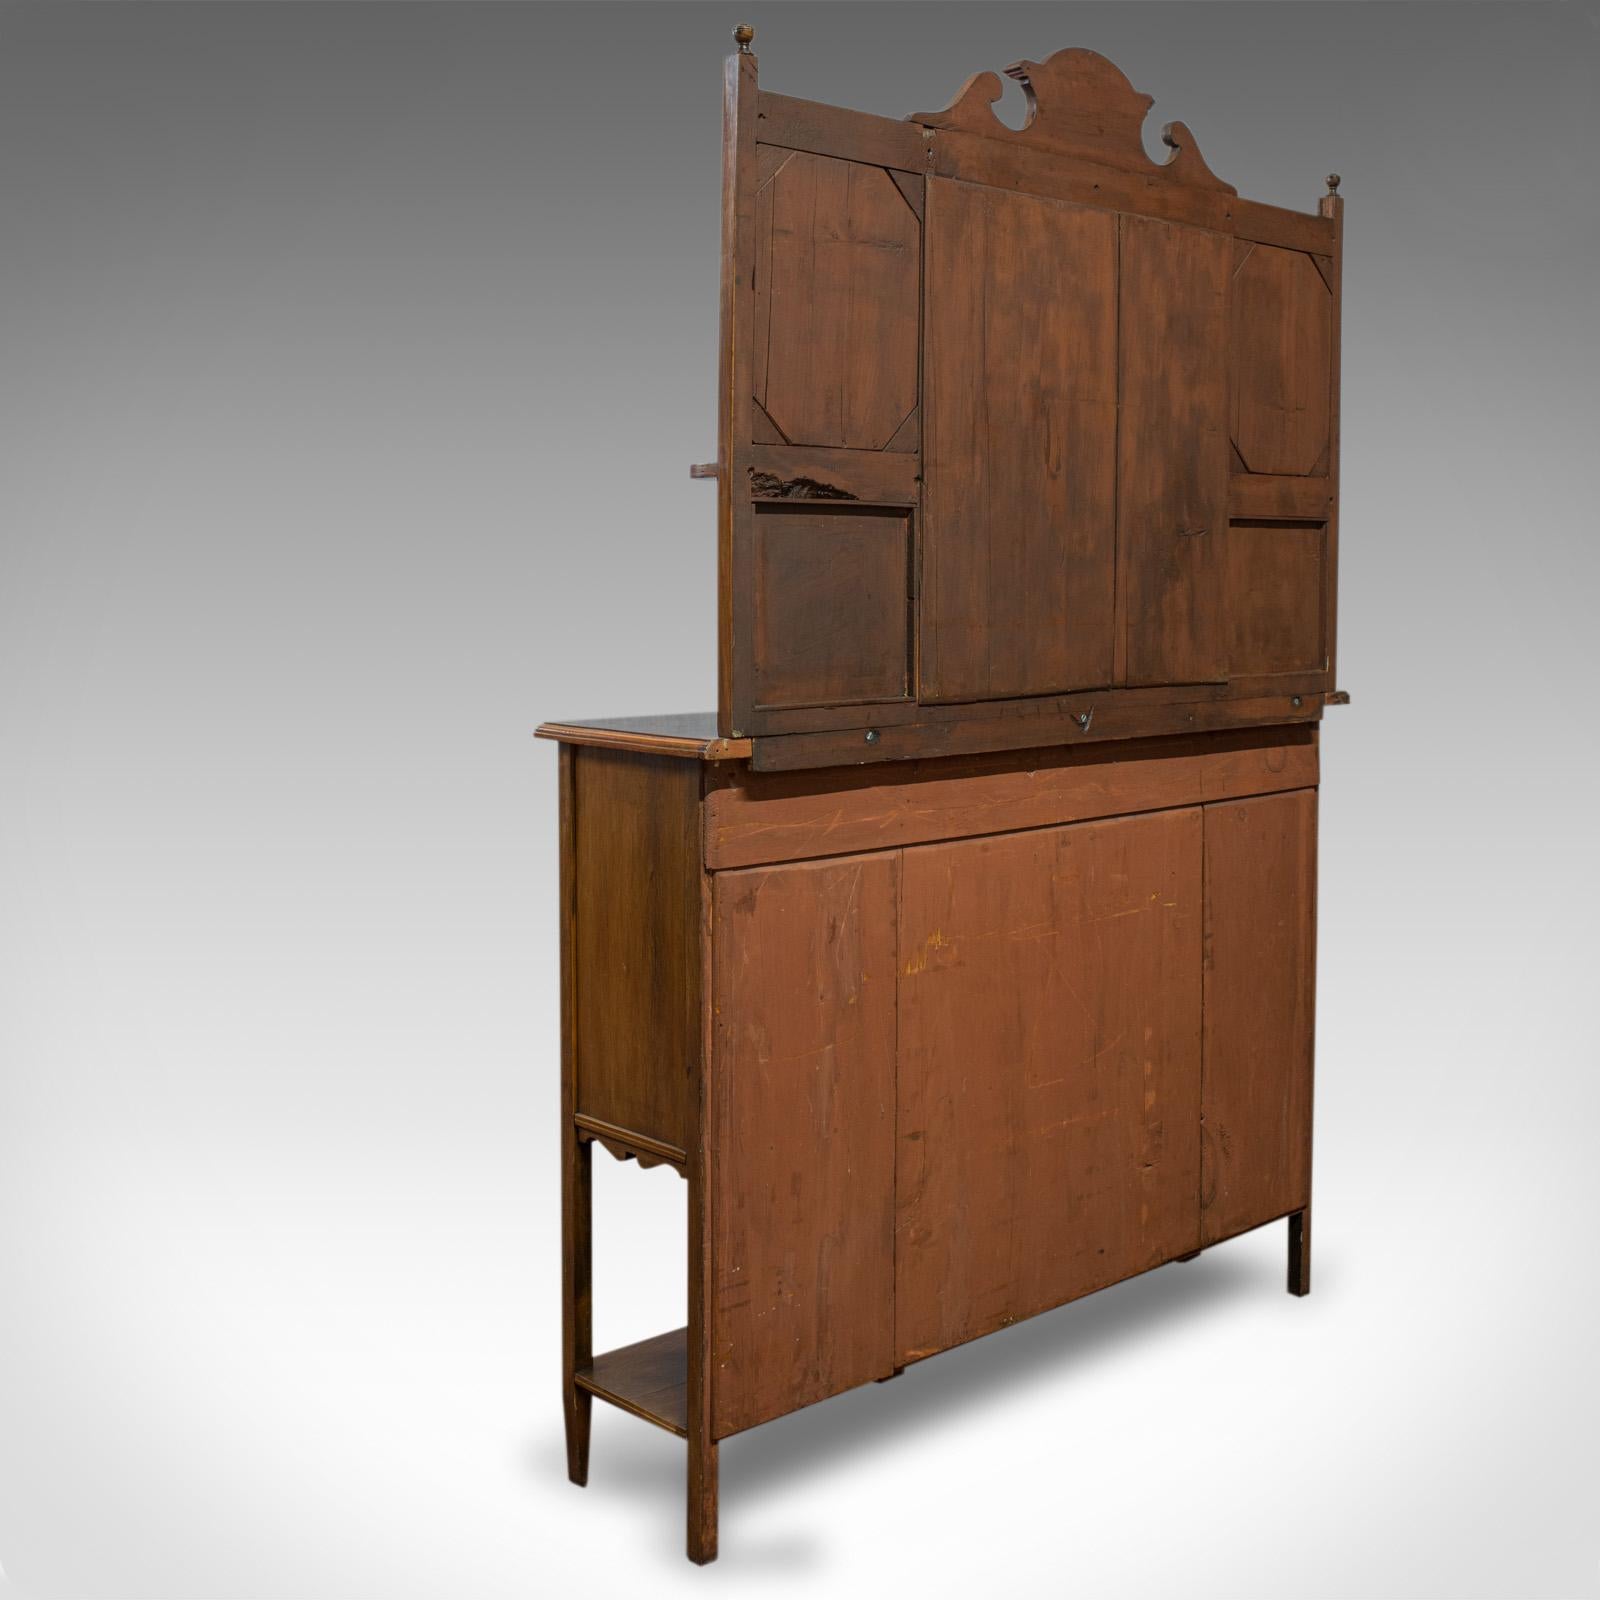 19th Century Sideboard, English, Rosewood, Dresser, Boxwood Inlay, Victorian, circa 1900 For Sale